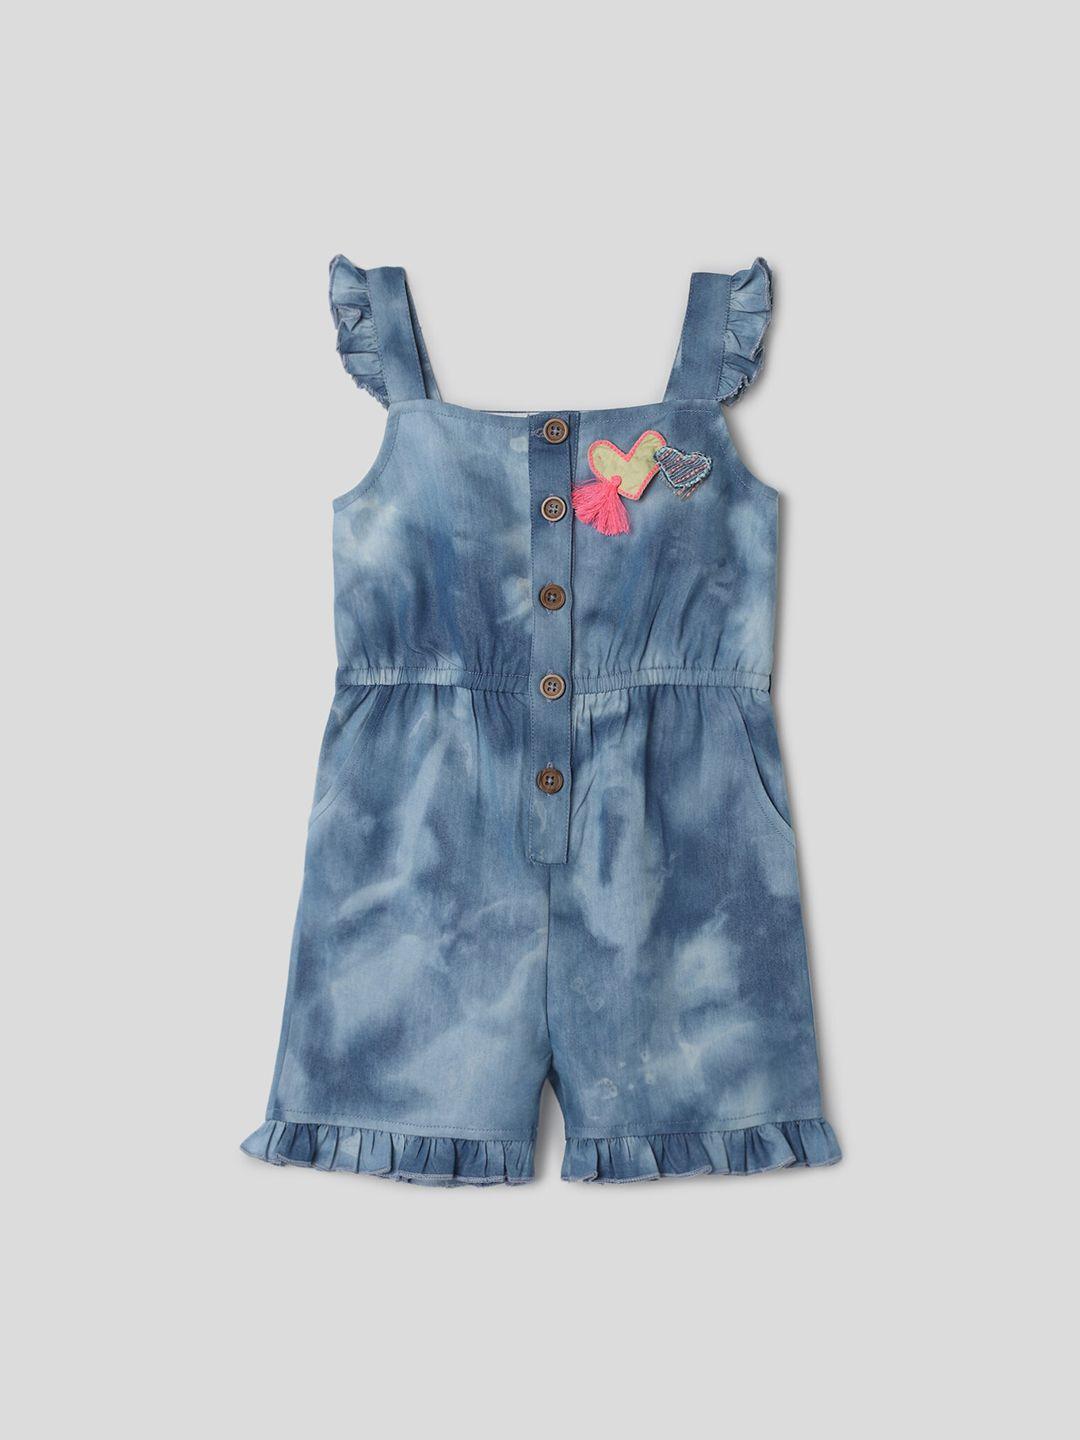 somersault girls embroidered tie & dye pure cotton rompers